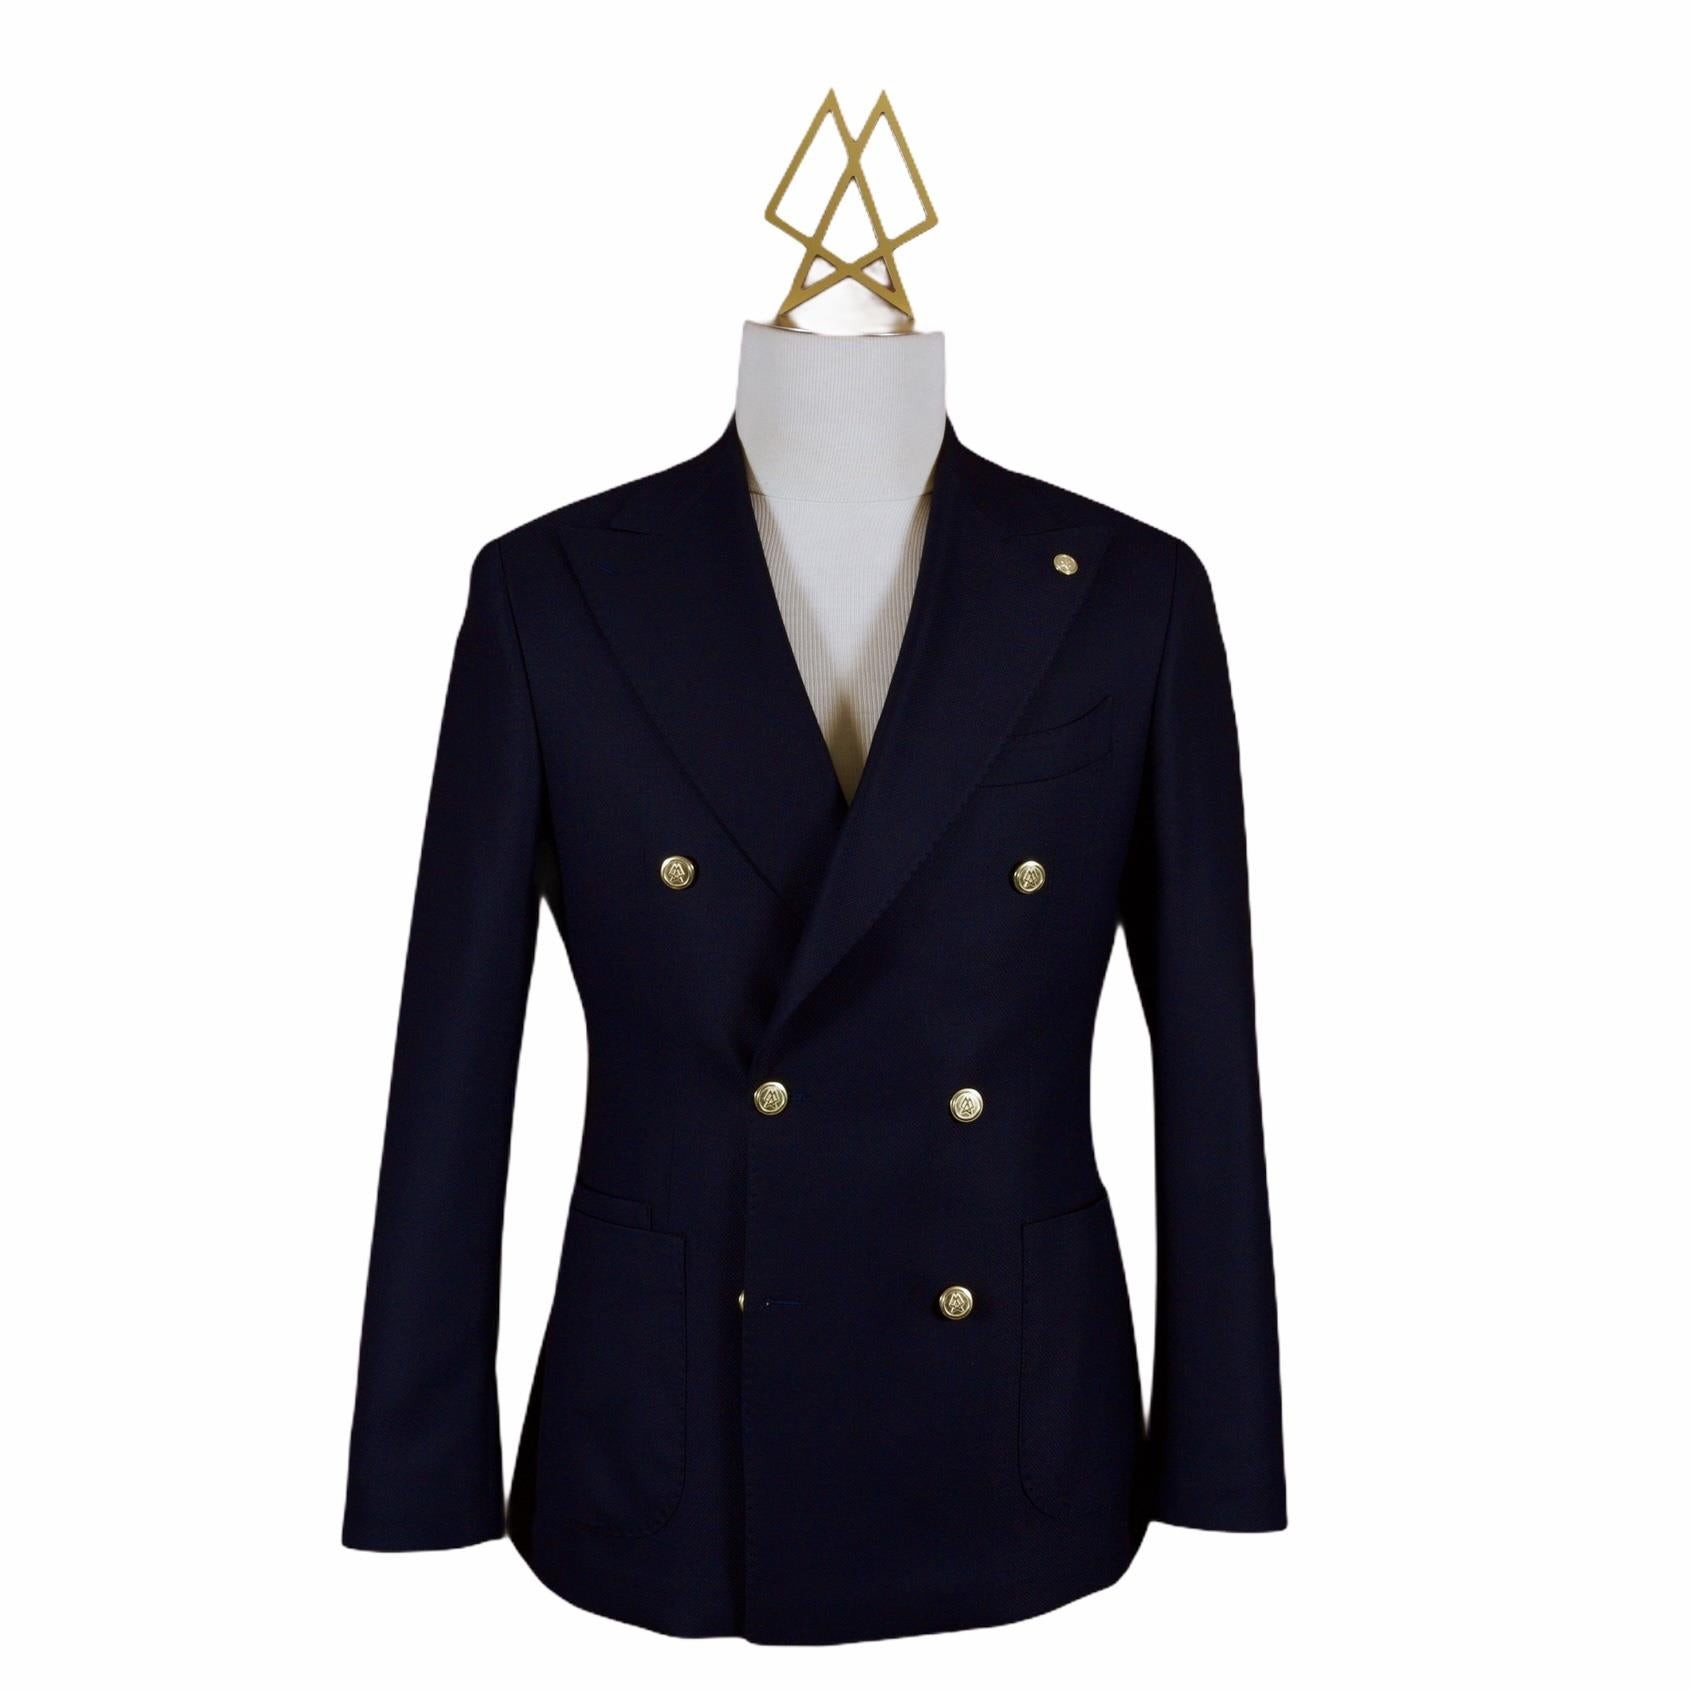 DOUBLE BREASTED NAVY BLUE HOPSACK BLAZER